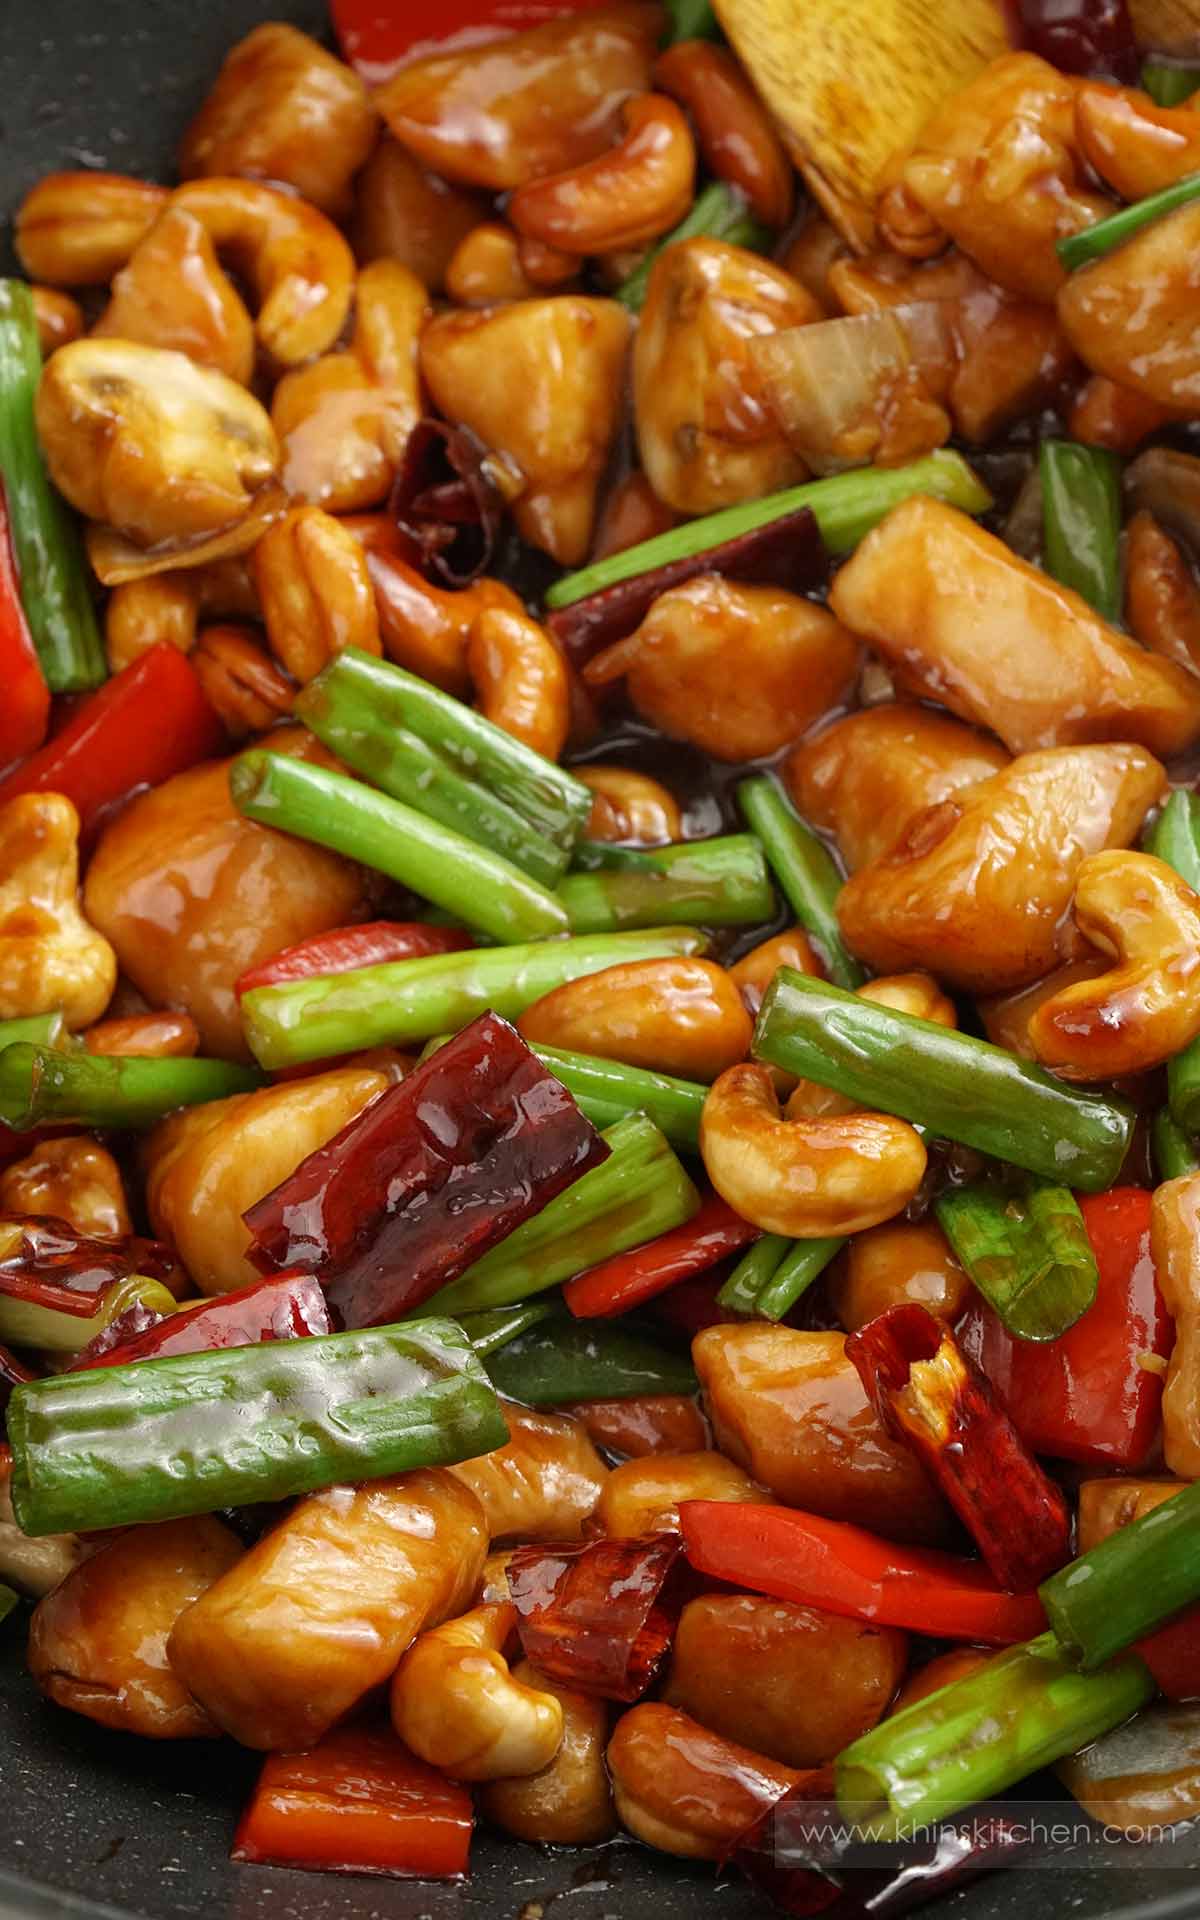 A large wok containing spicy chicken stir fries with spring onions, chillies, mushrooms and cashew nuts.